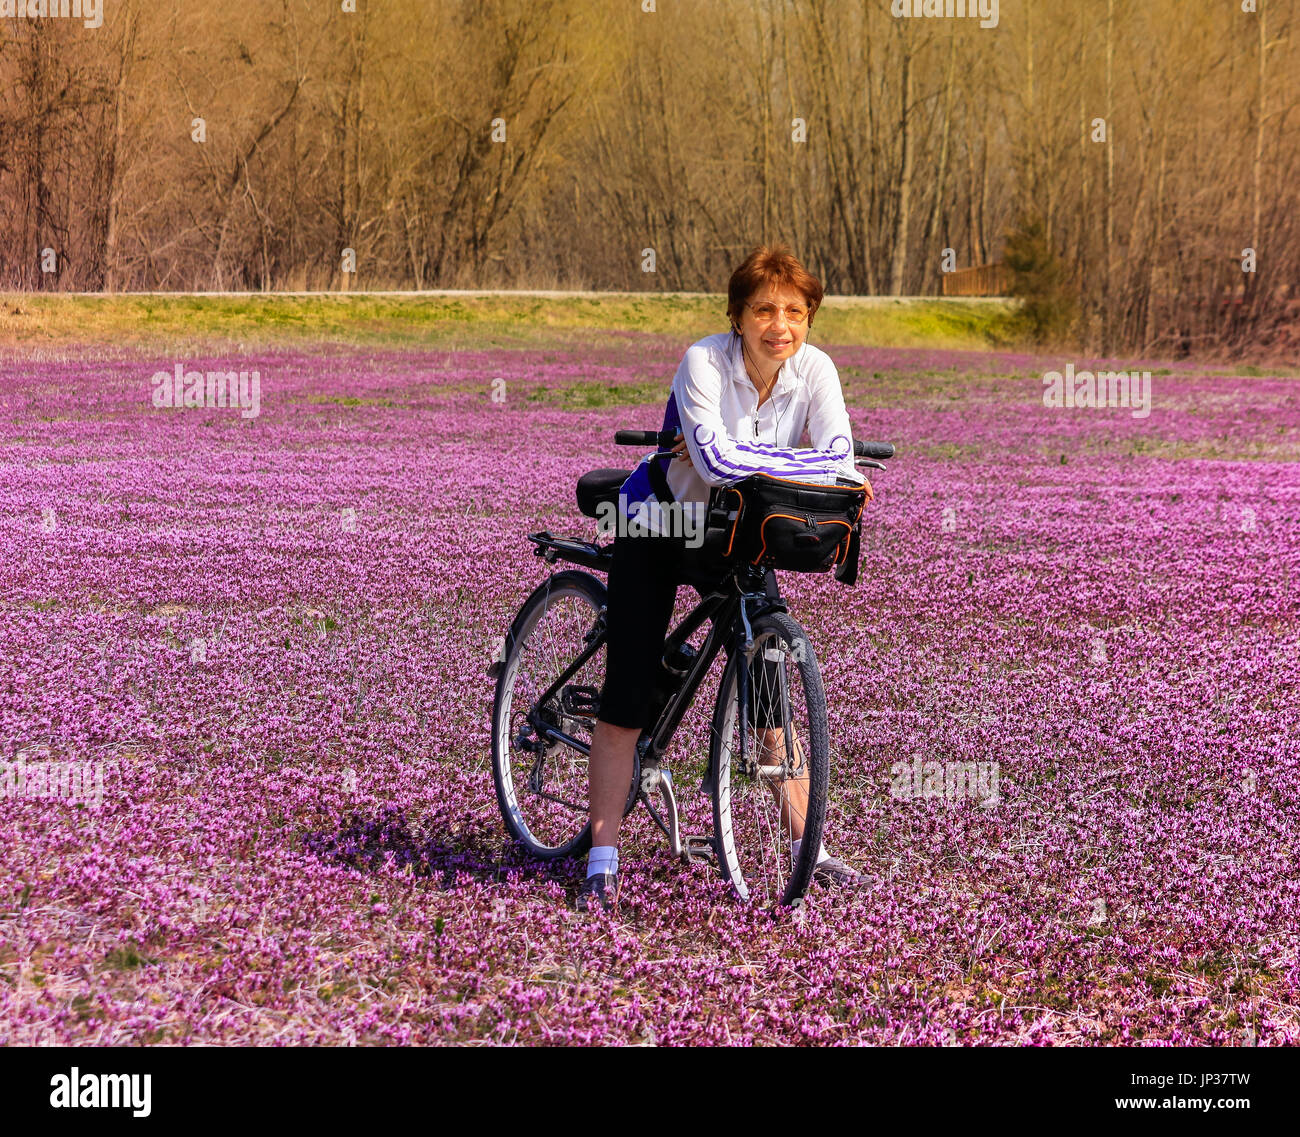 Middle aged woman bicyclist leaning on her bike in the middle of a field covered with purple wildflowers; Missouri, Midwest Stock Photo